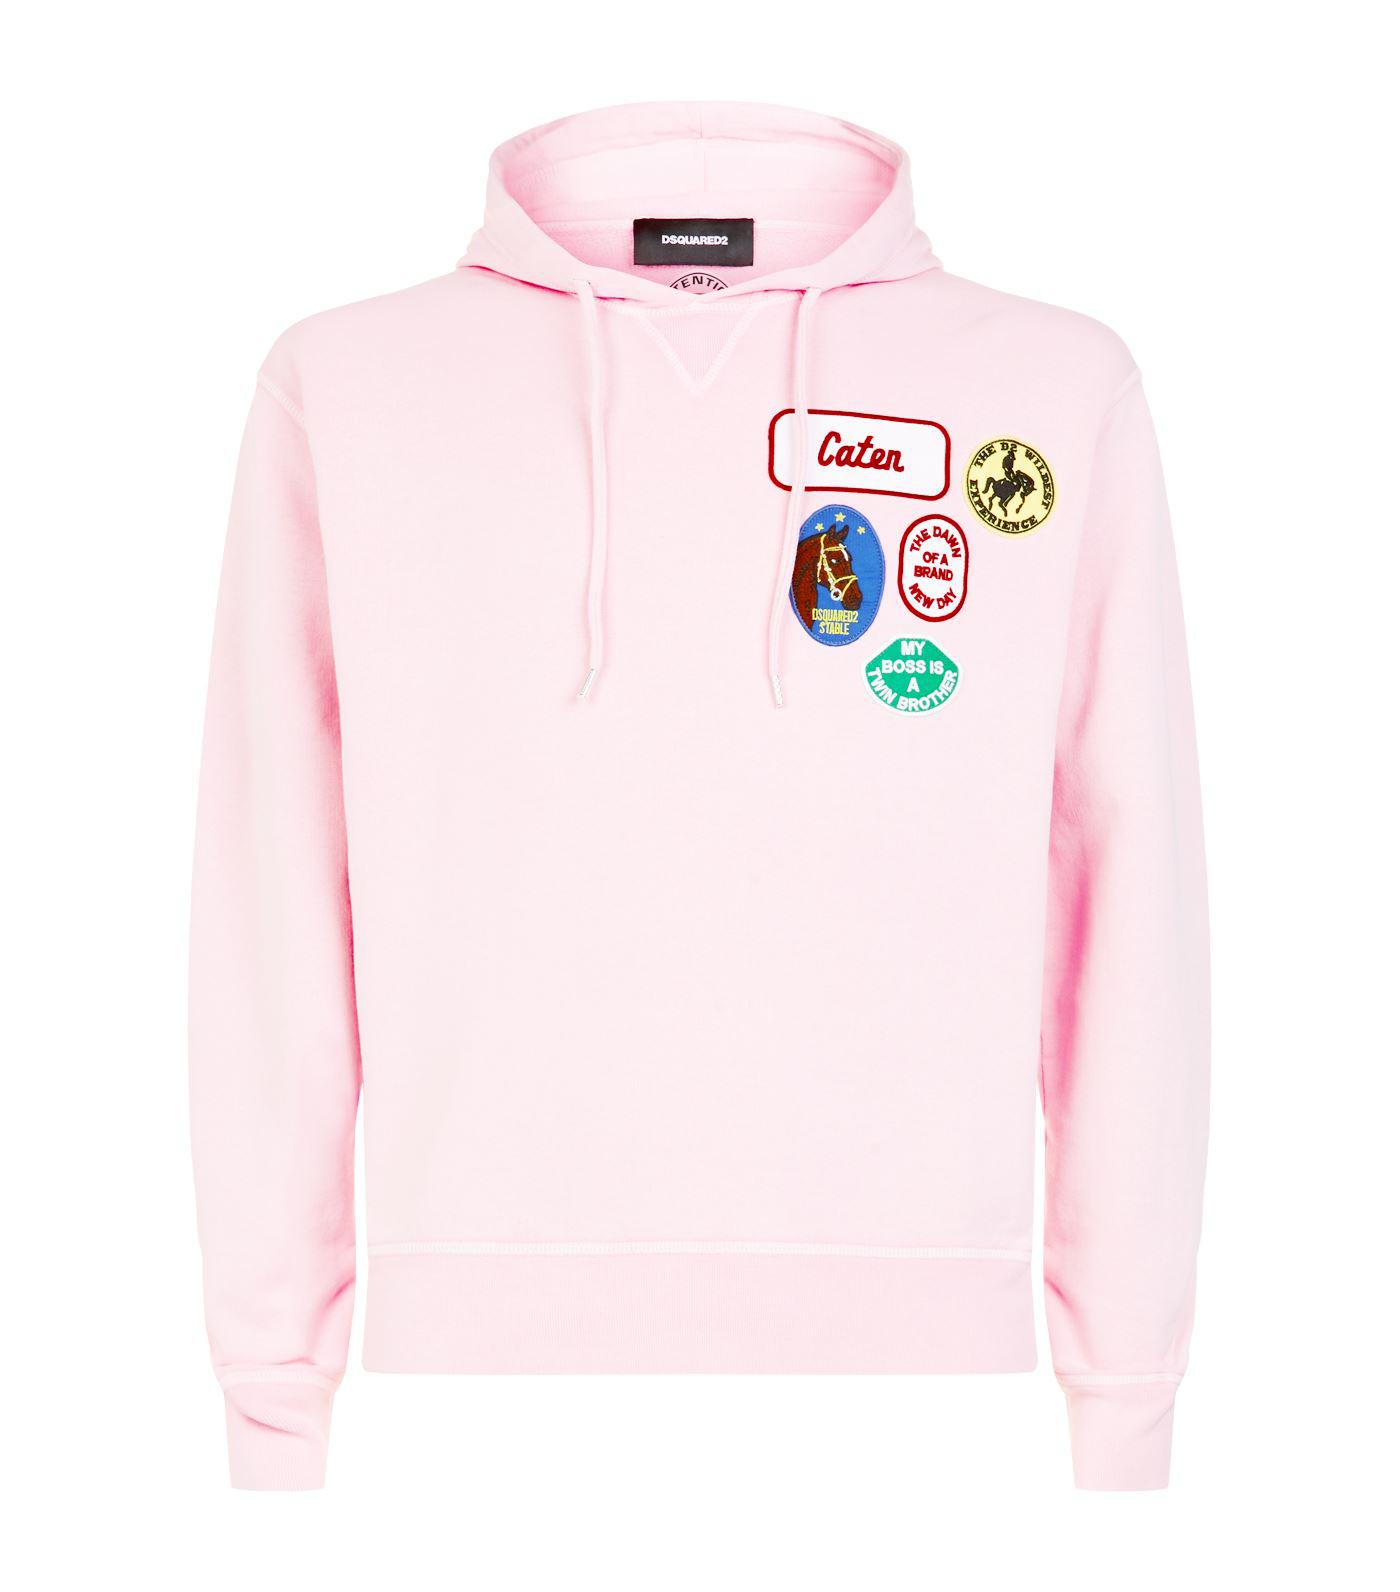 DSquared² Cotton Patch Hoodie in Pink for Men - Lyst